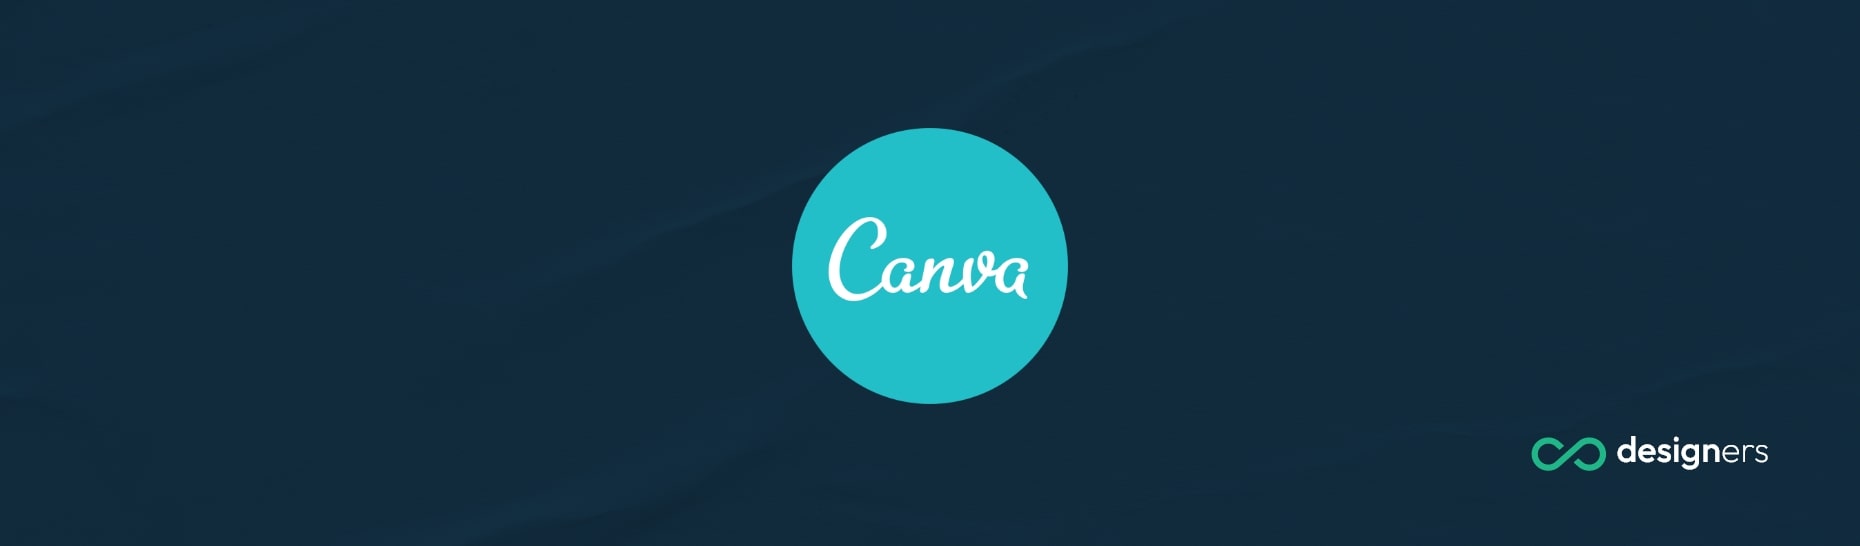 Can I Use Canva Logo for My Business? 